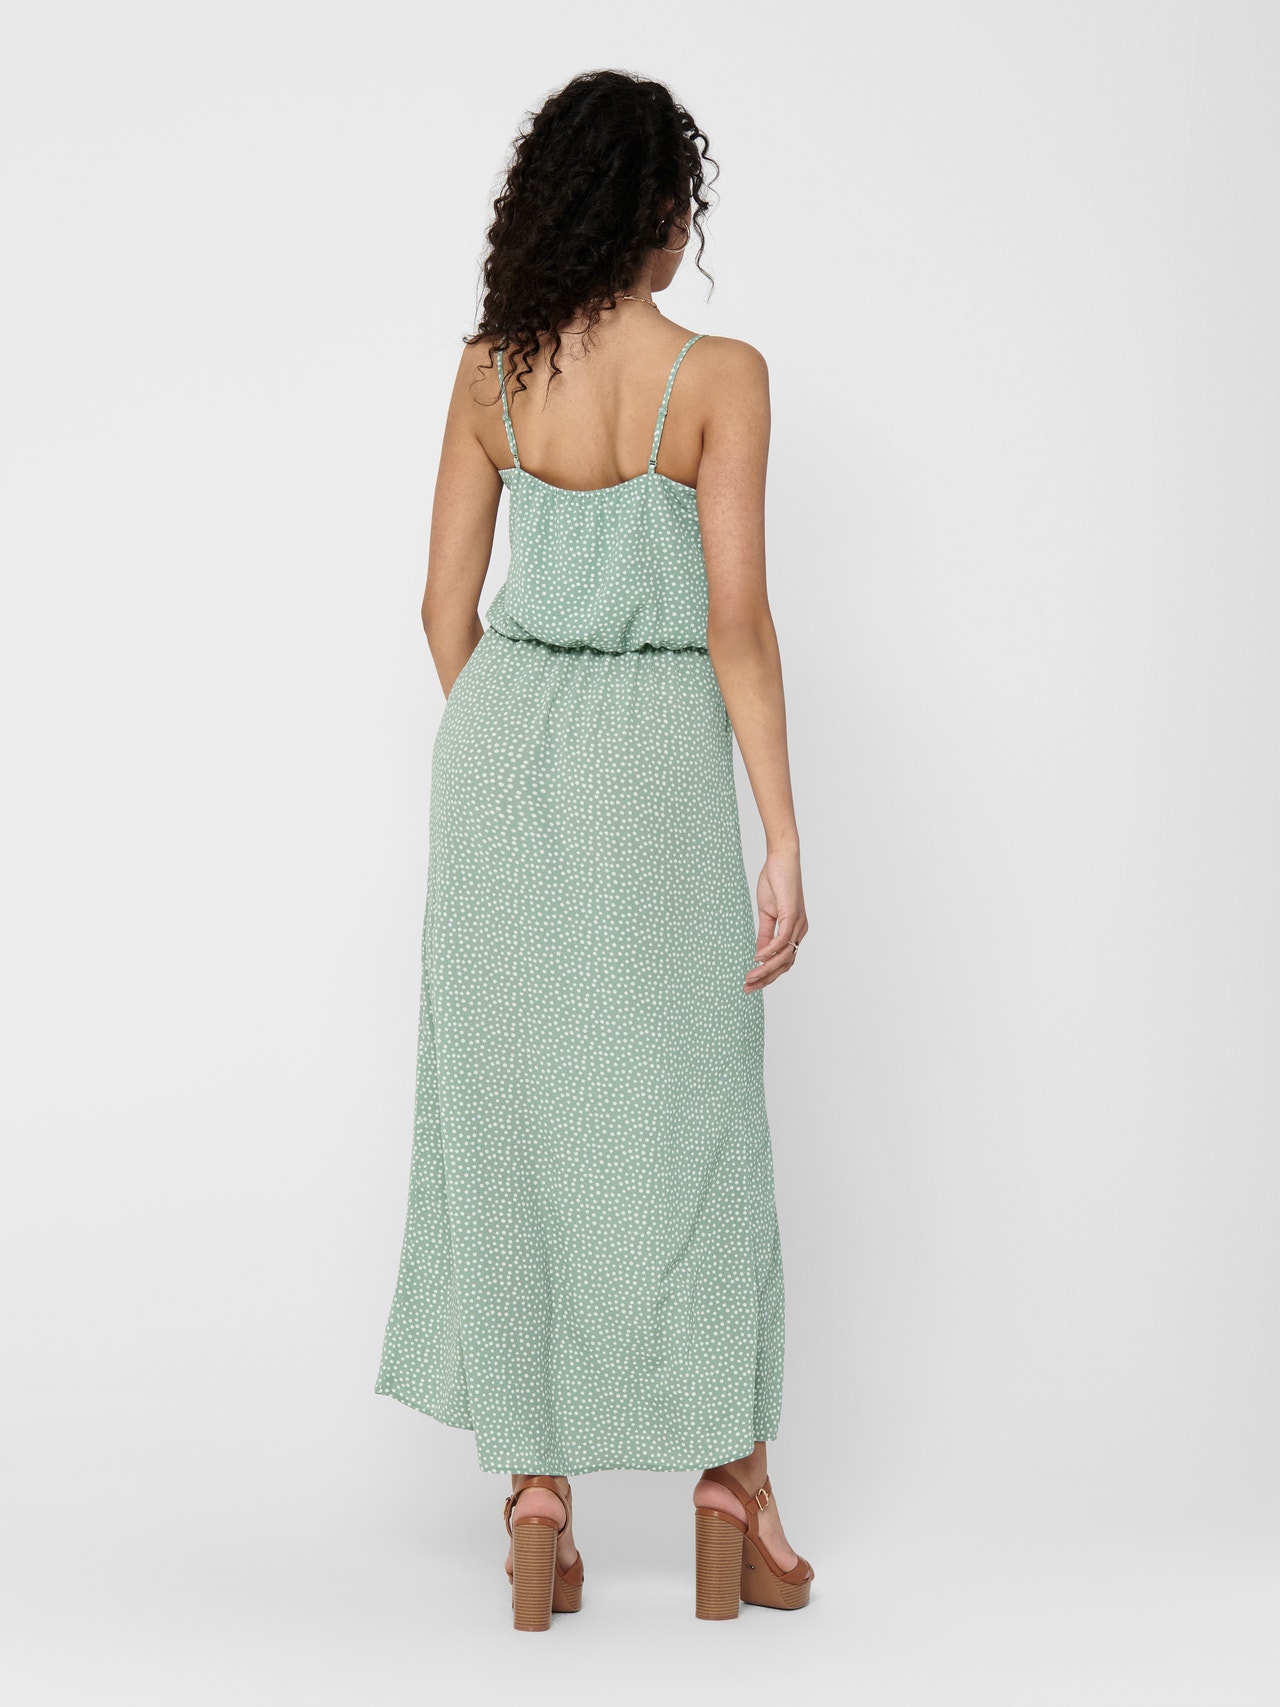 ONLY Sin mangas Vestido maxi -Chinois Green - 15177381